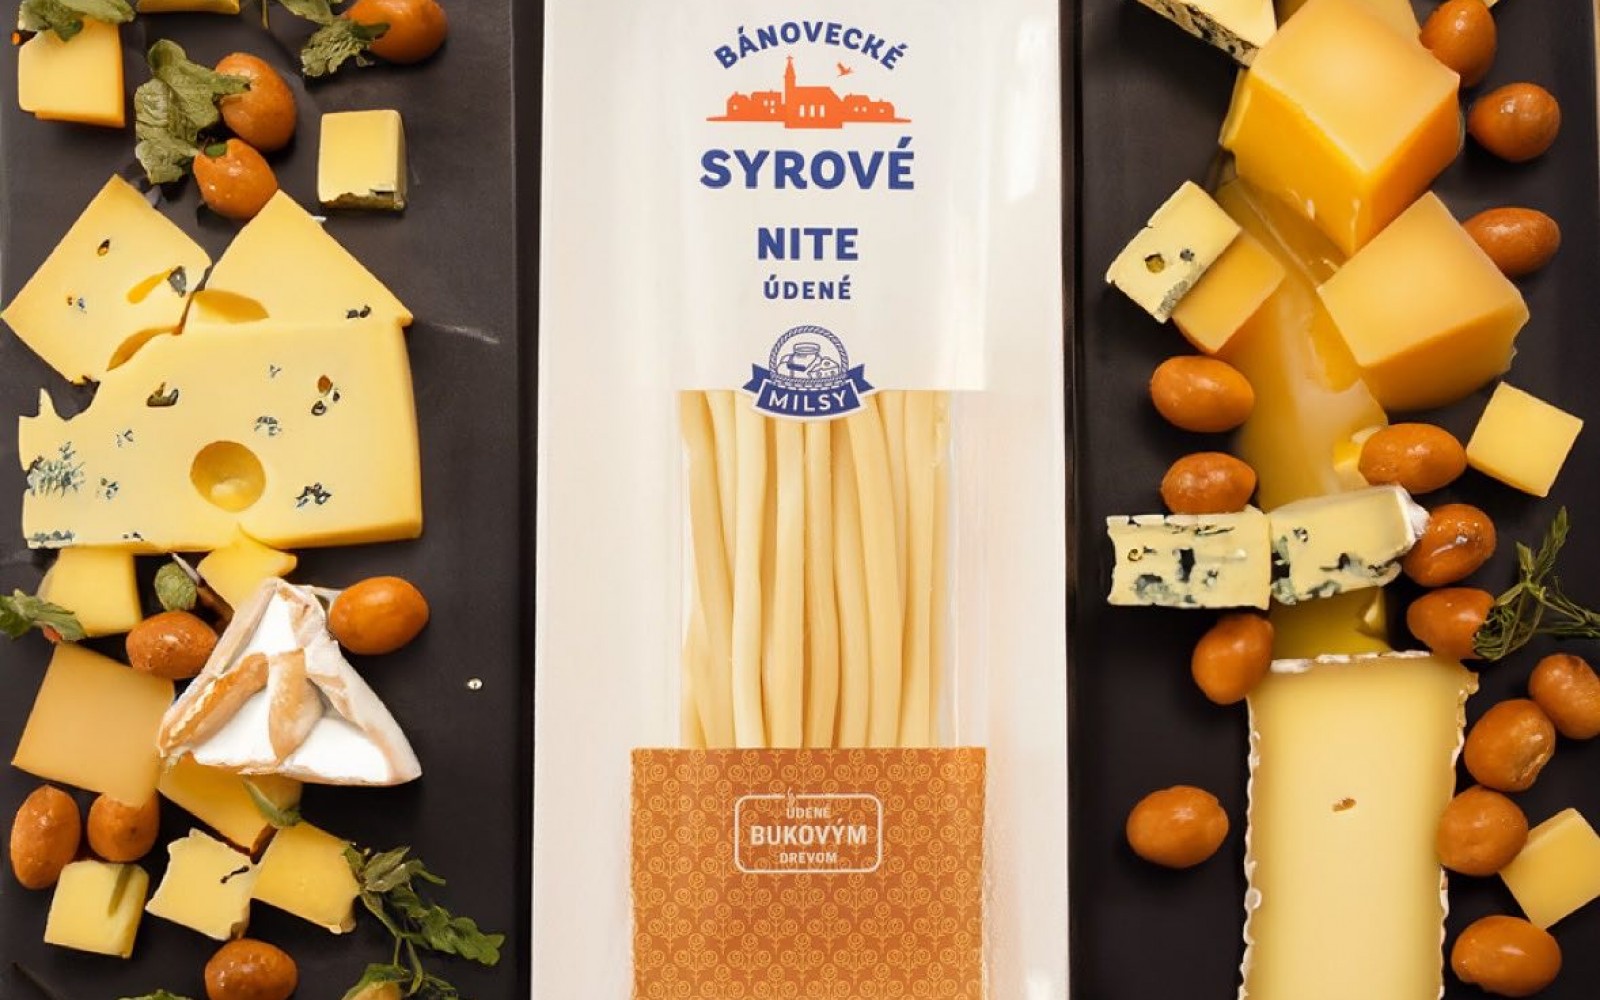 What could spice up a sandwich or a cheese plate better than a Milsy smoked cheese?